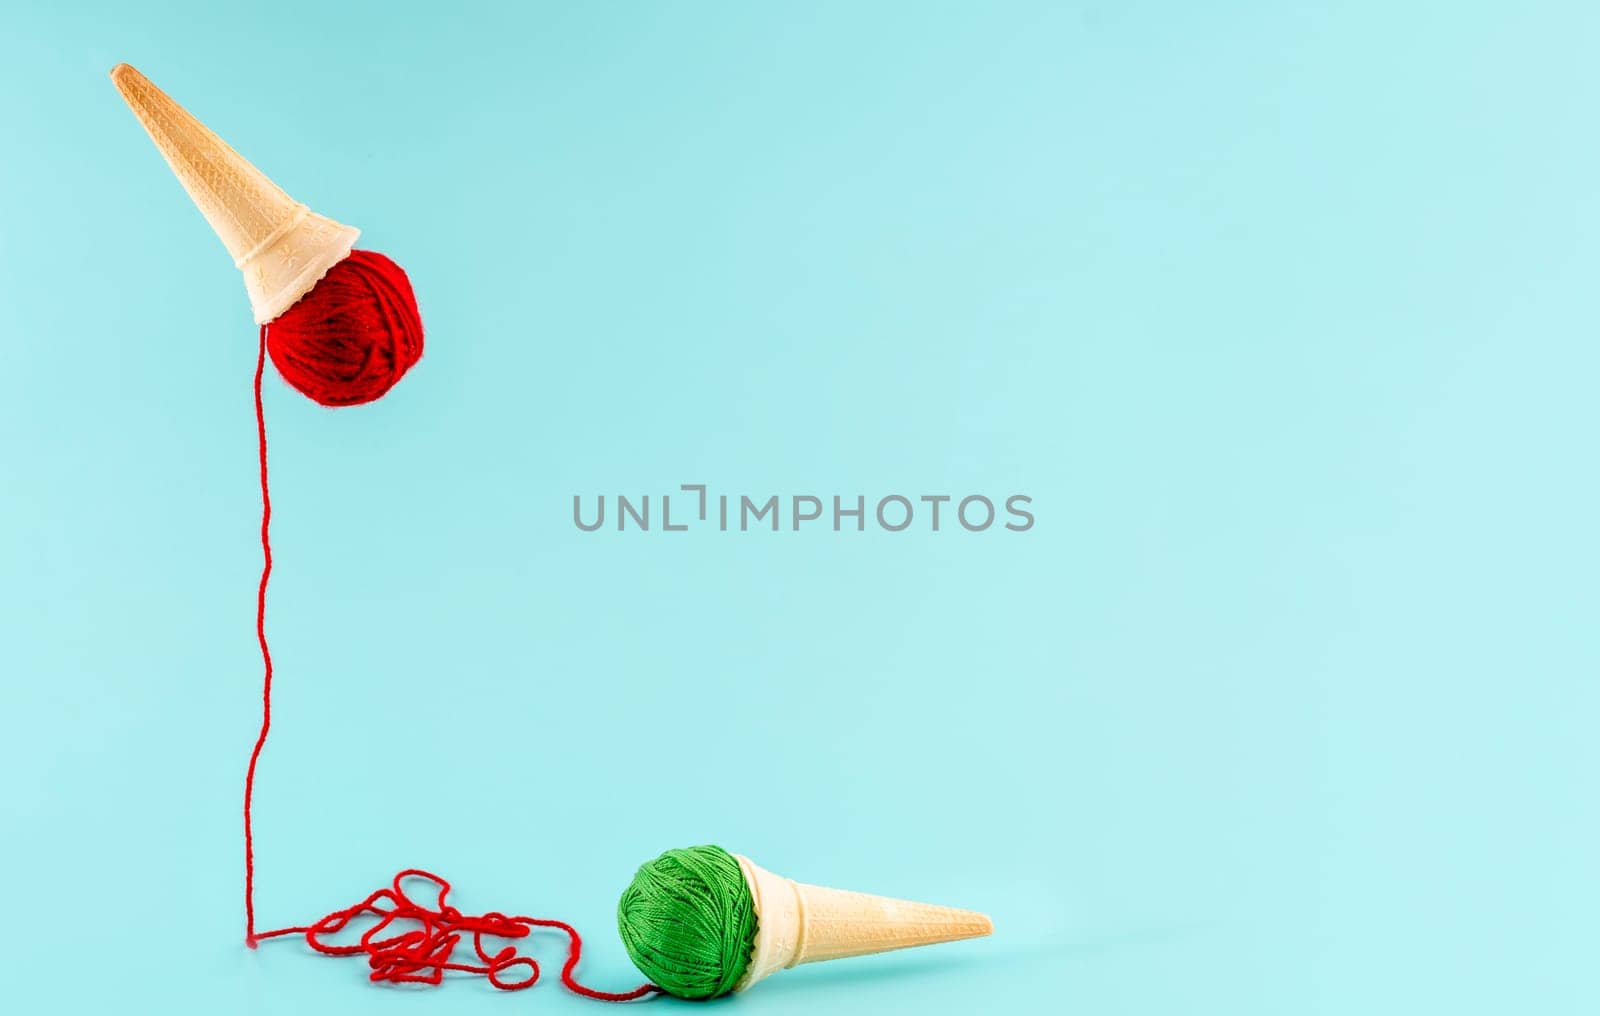 two waffle cones with red and green yarn instead of ice cream hobby concept on blue background by Iryna_Melnyk